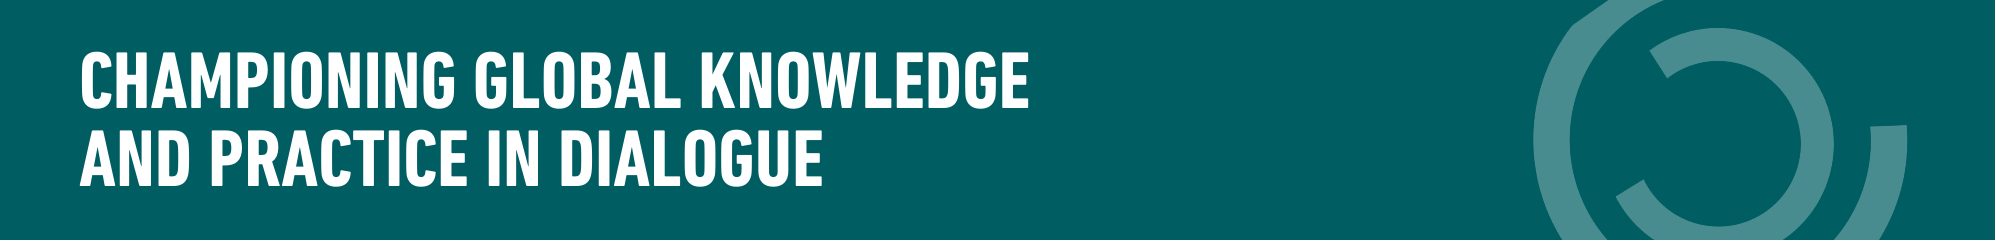 Dark teal background with circle motif and text "Championing global knowledge and practice in dialogue"